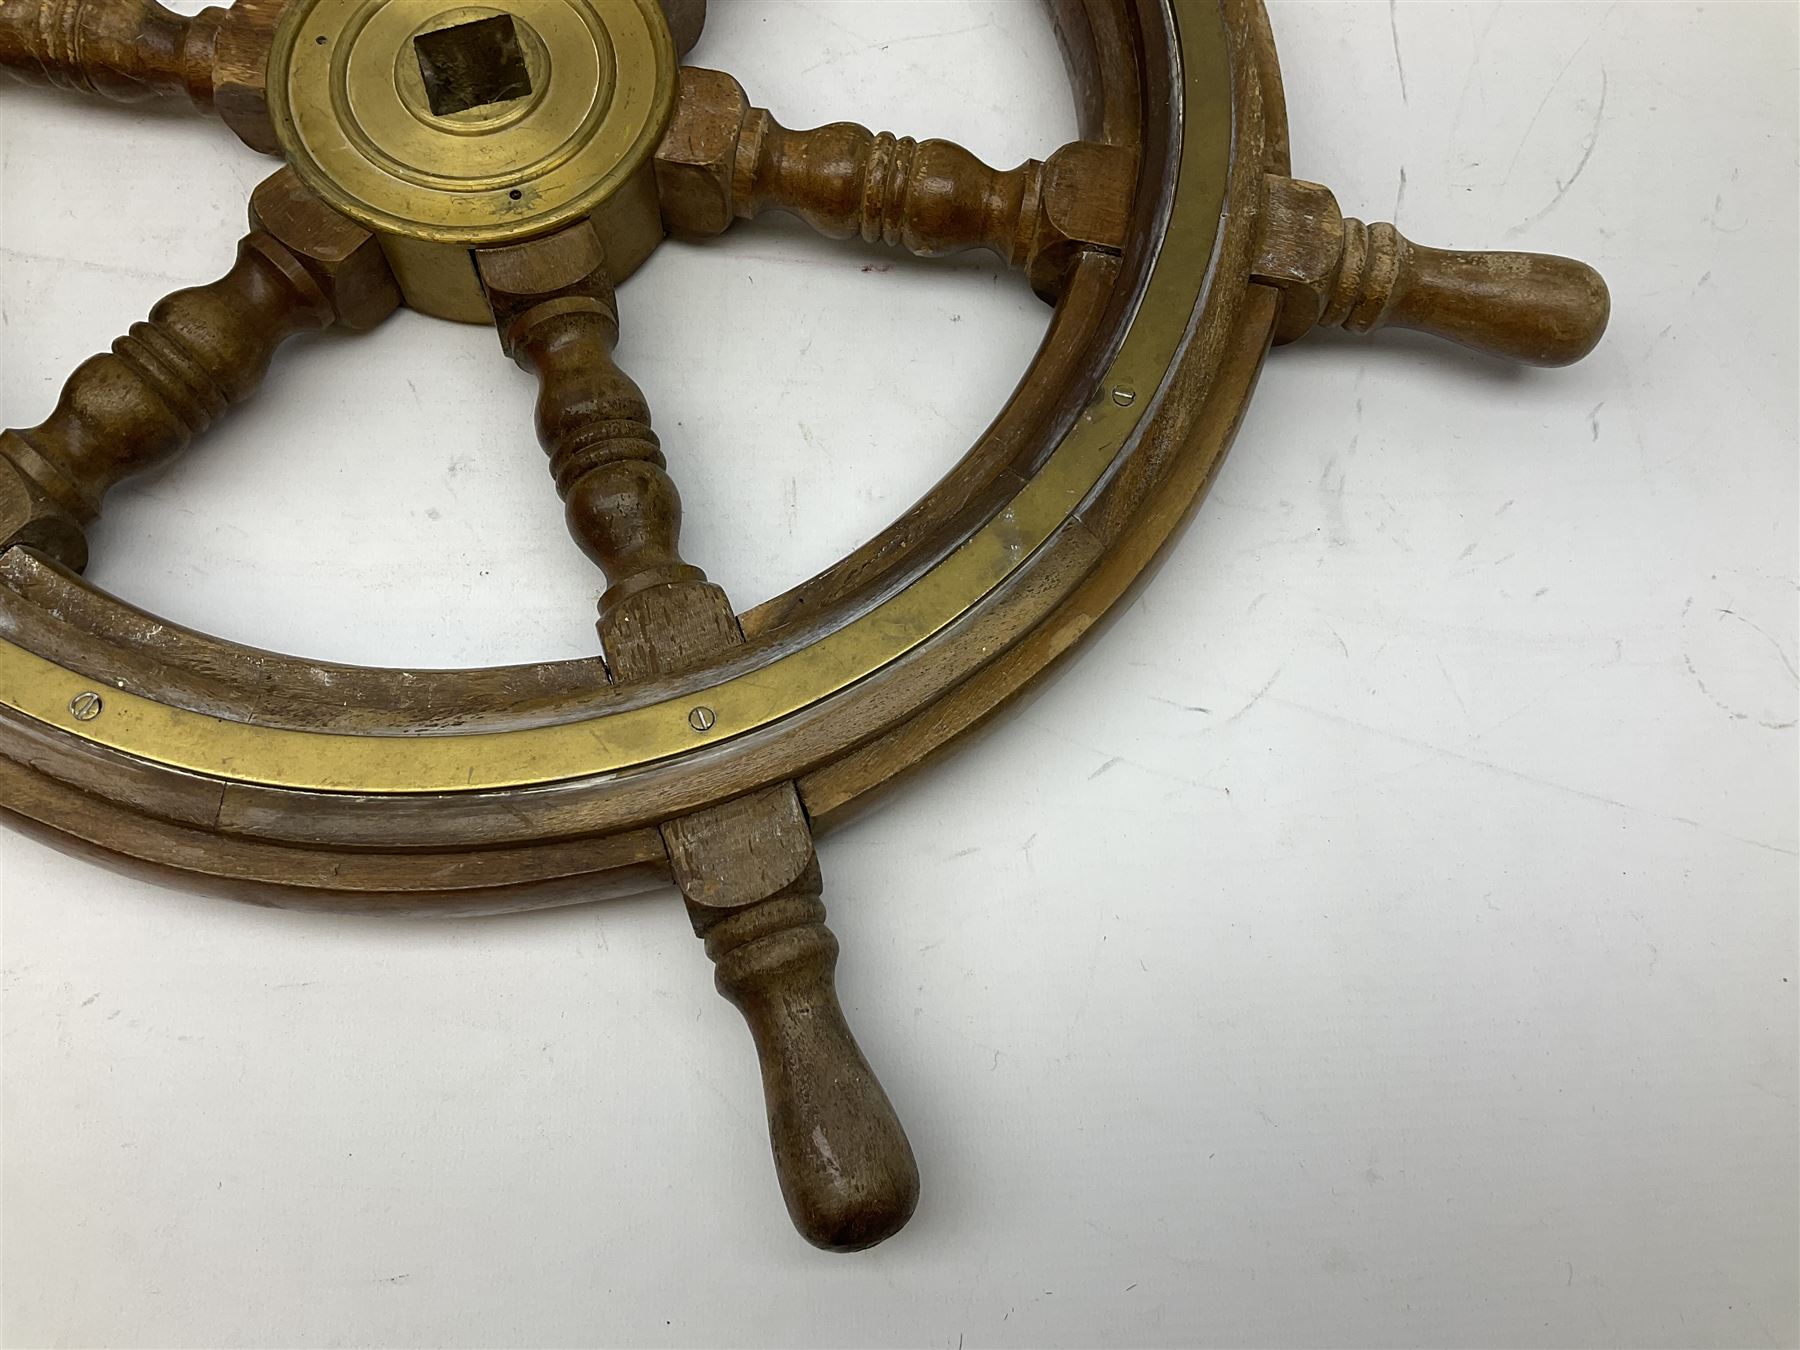 Six turned spokes ship wheel with brass central boss - Image 5 of 8